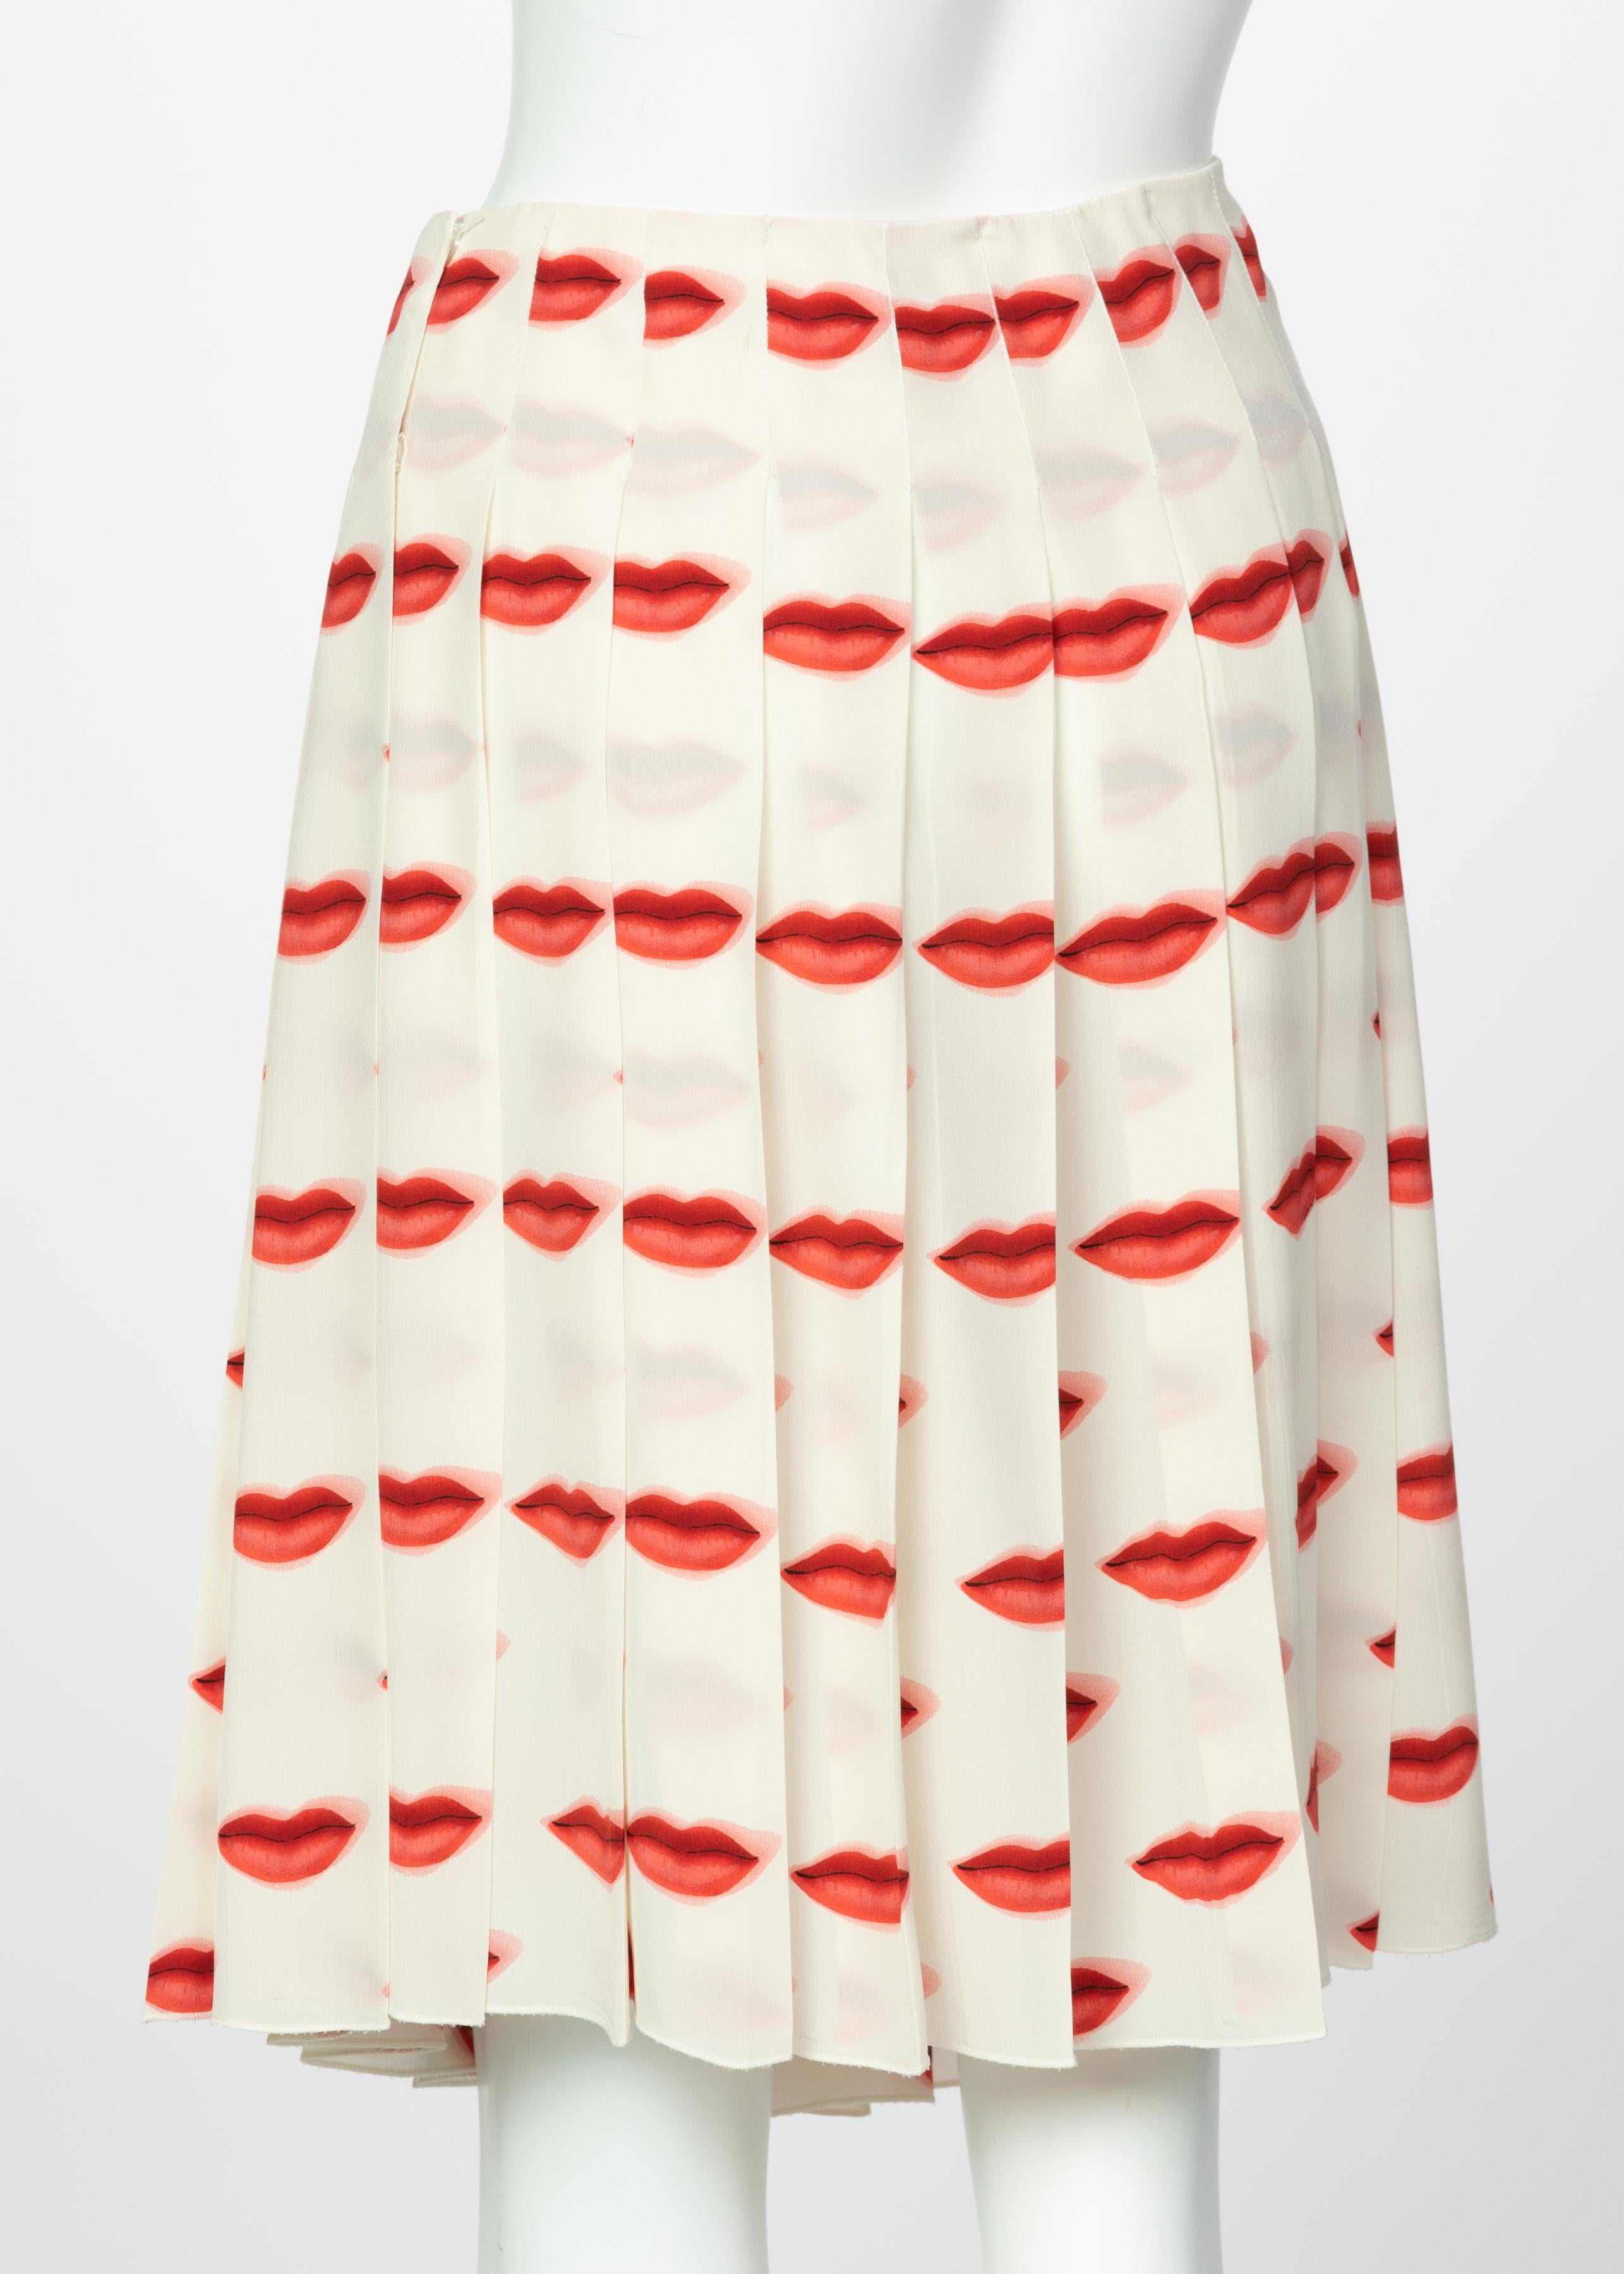 Iconic Prada Red Lip Print Pleated Skirt, Spring 2000 In Excellent Condition In Boca Raton, FL